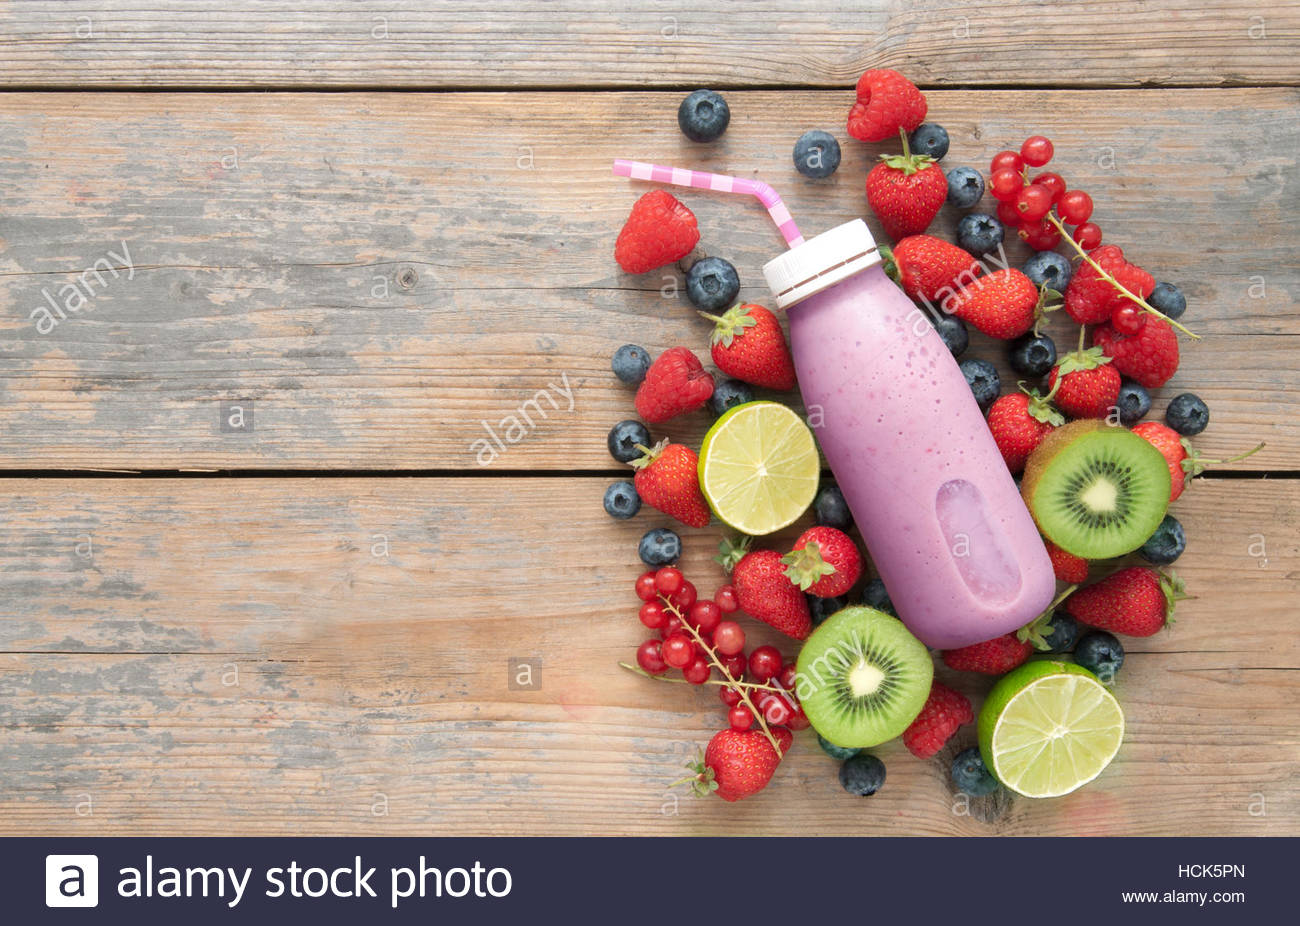 Berry Smoothie In A Bottle With Ingredients On Top Of Wooden